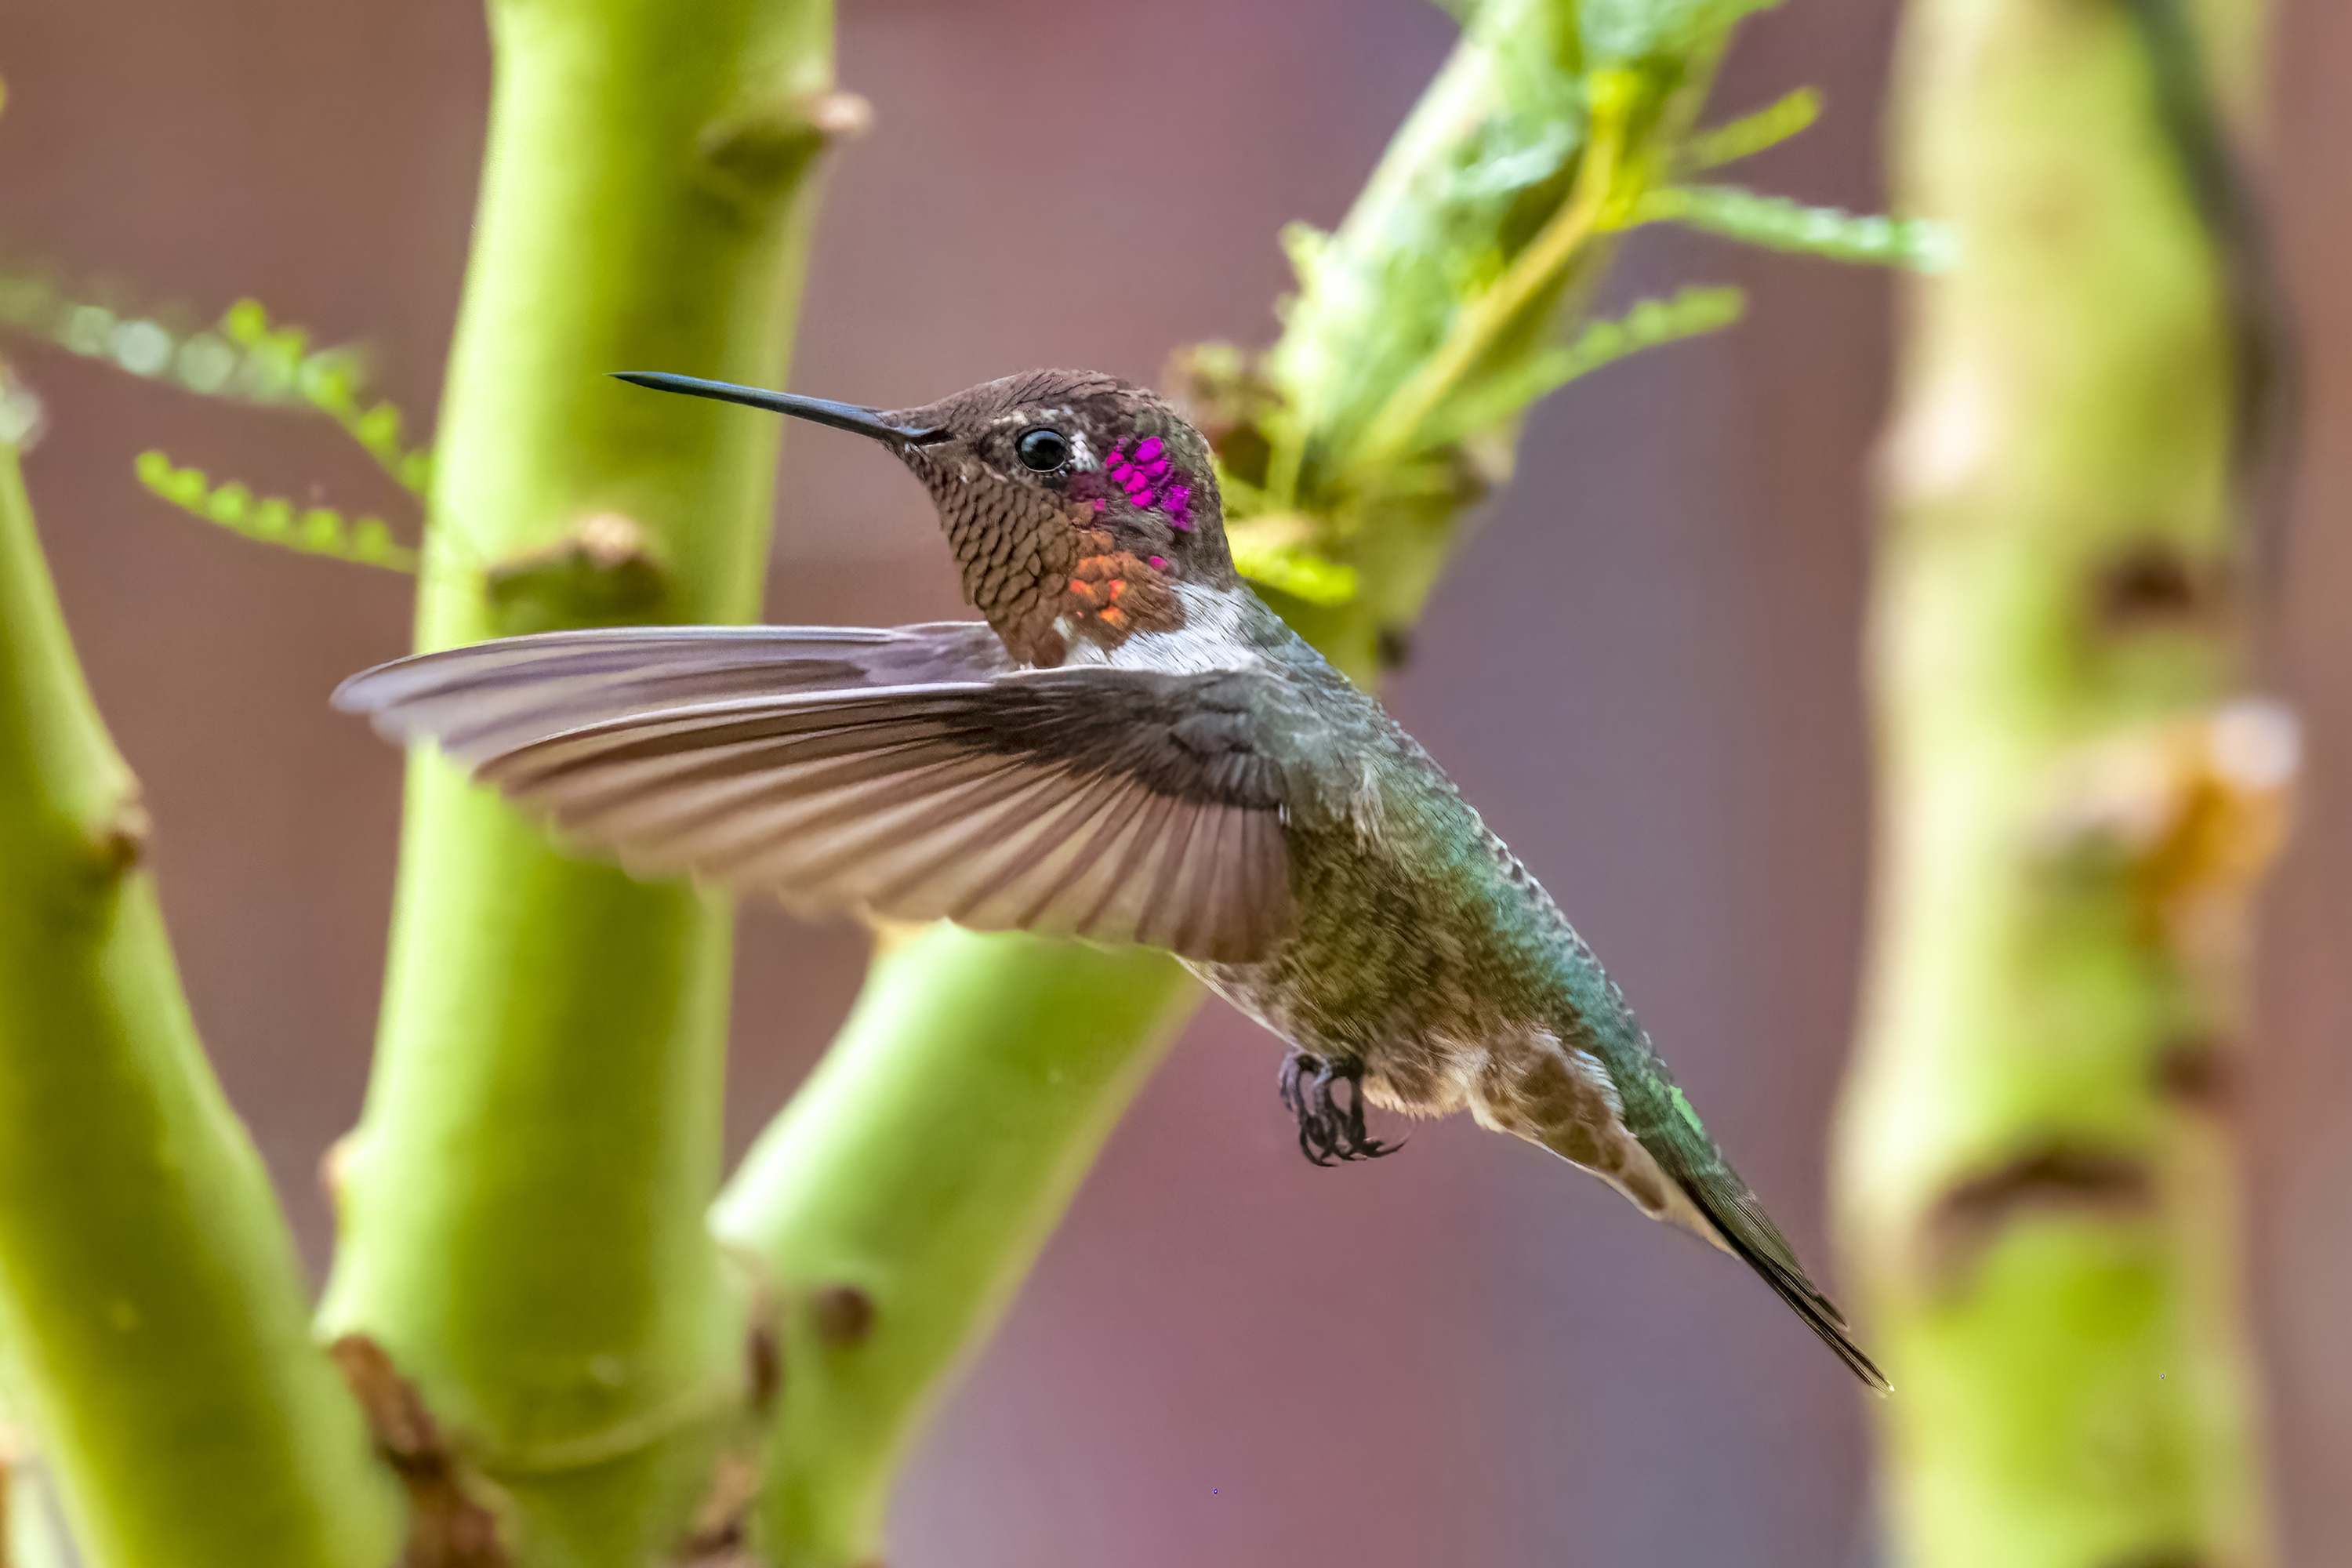 Photo by Harry Dennis Taylor Jr  |  Local hummingbird photographed in our backyard area on a rainy day.